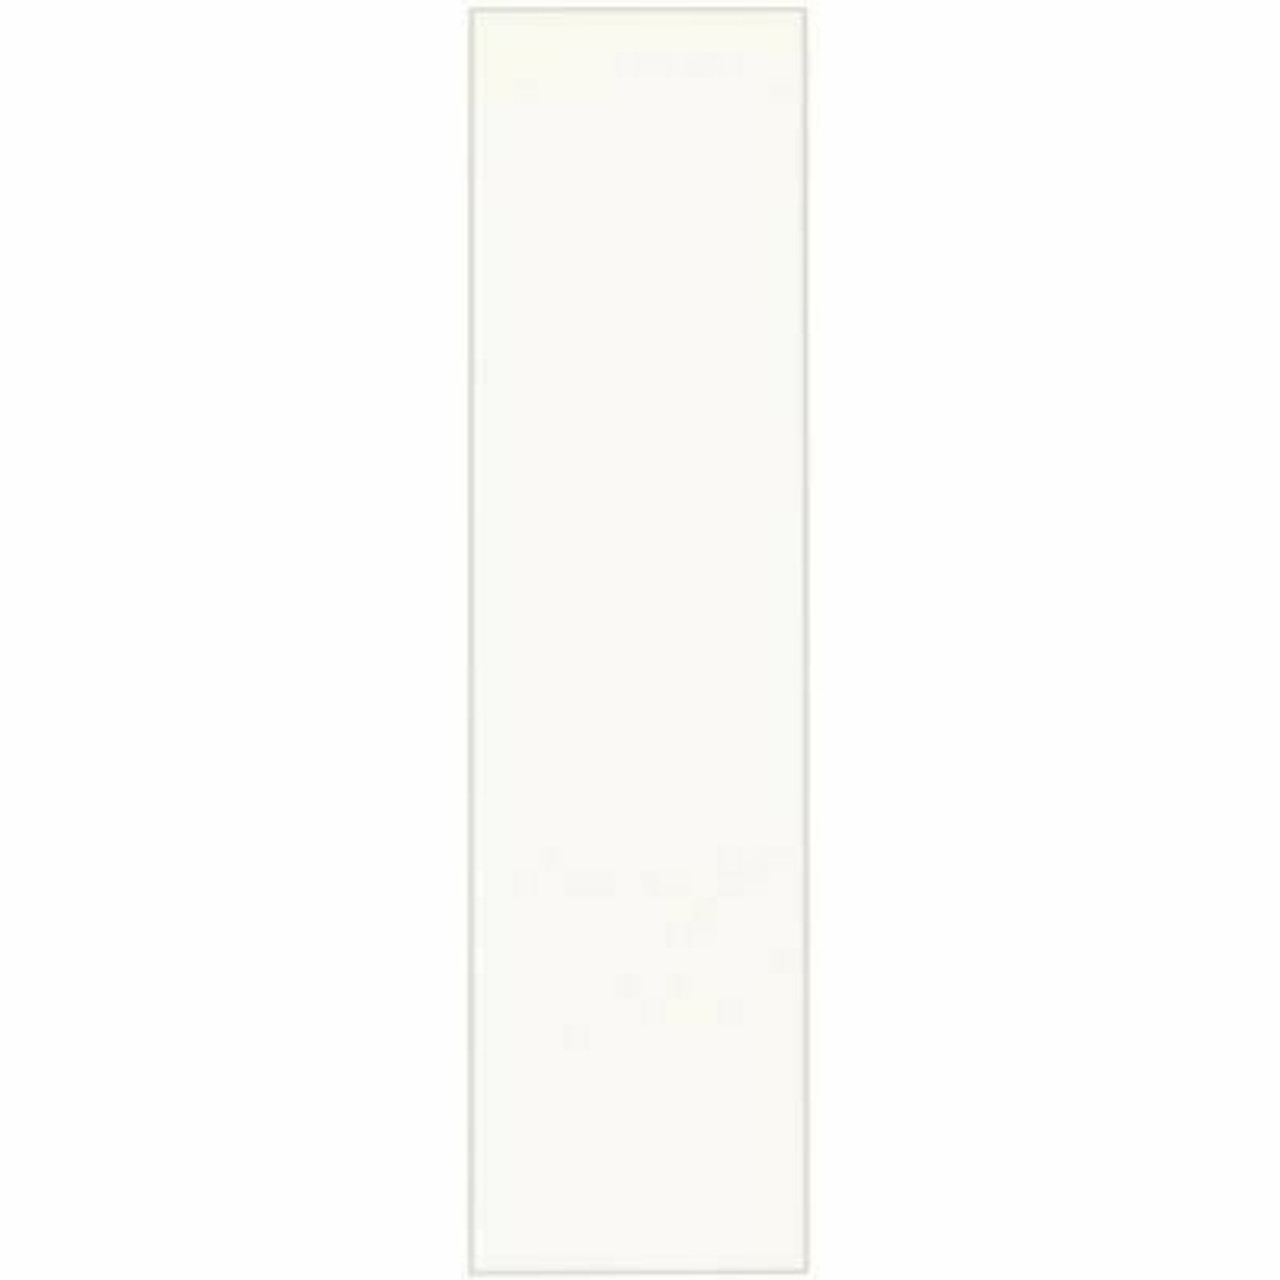 Hampton Bay 0.1875X42X11.25 in. Cabinet End Panel In Satin White (2-Pack)